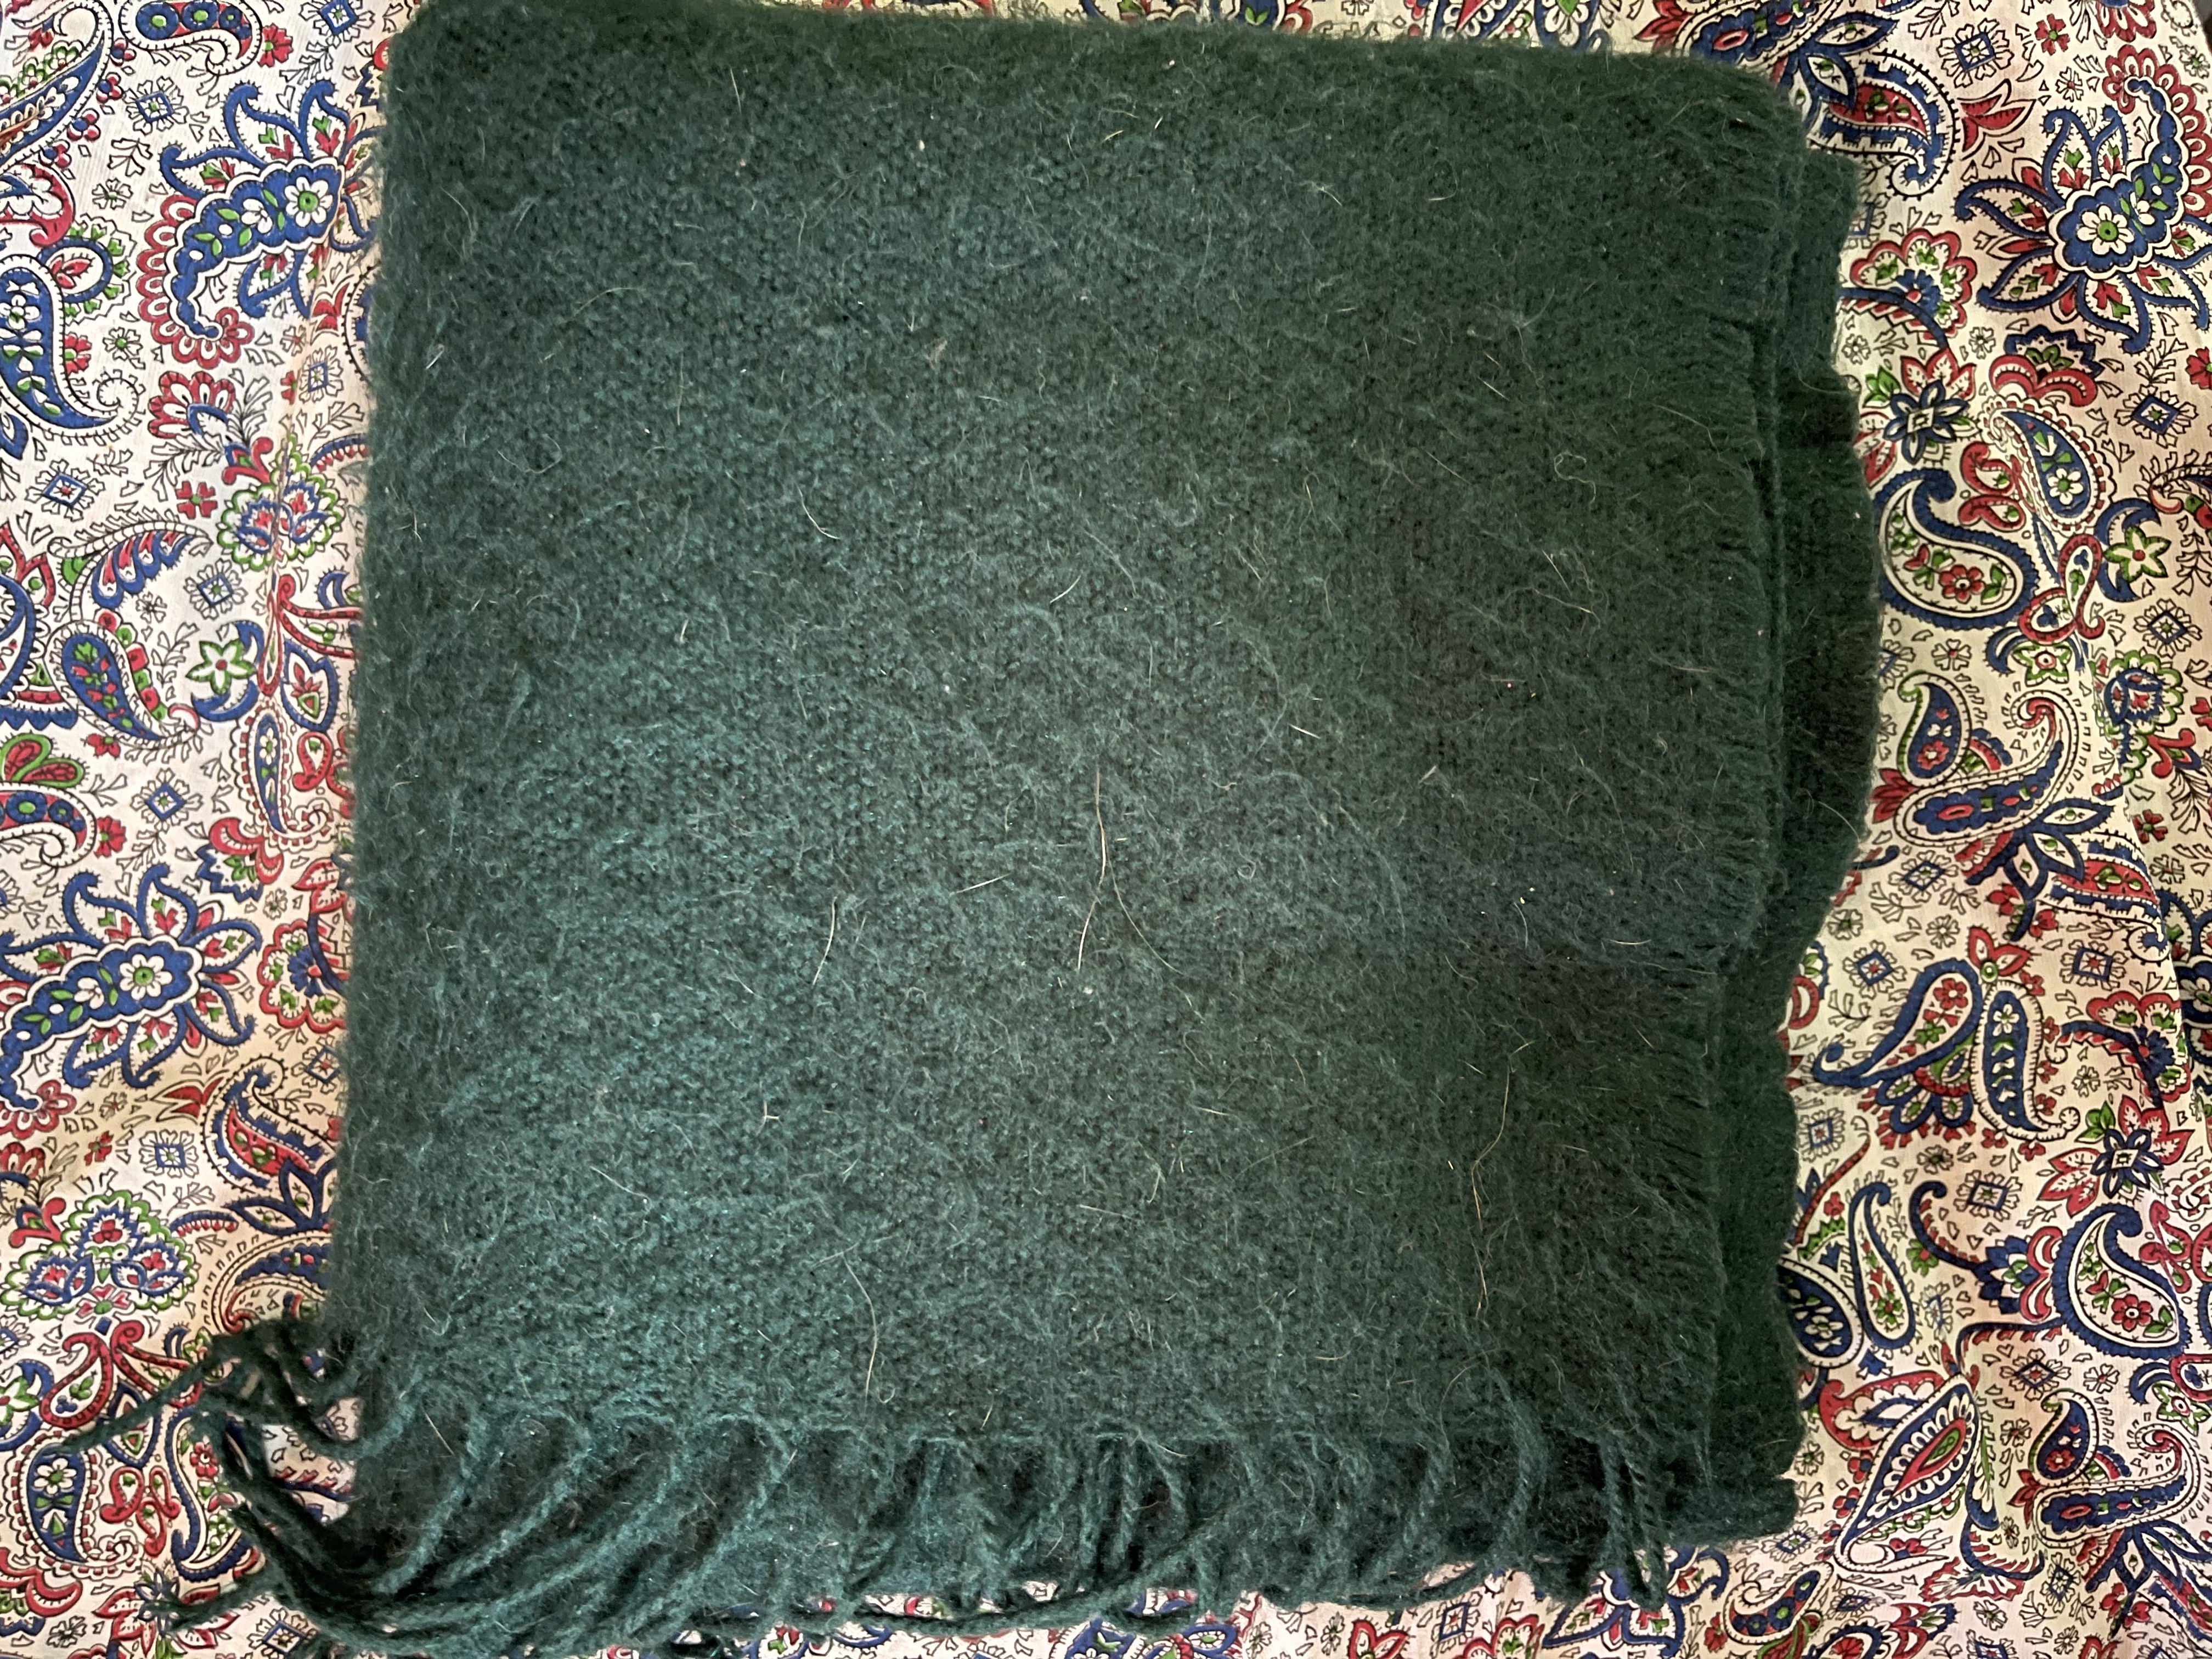 wool scarf before lint removal.